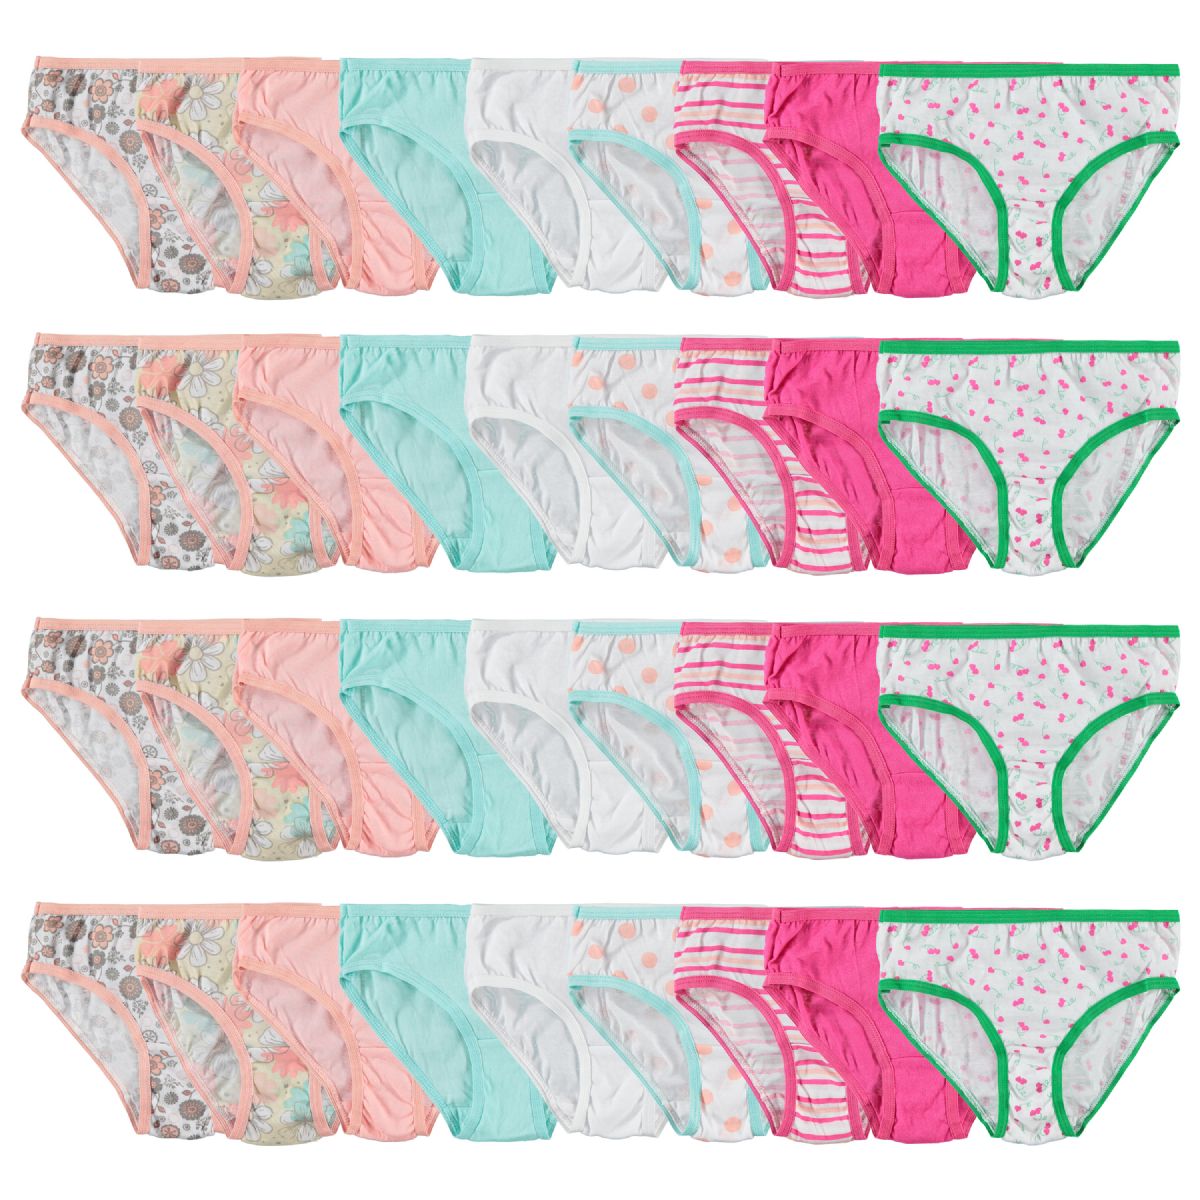 72 Wholesale Girls Cotton Blend Assorted Printed Underwear Size 8 - at 